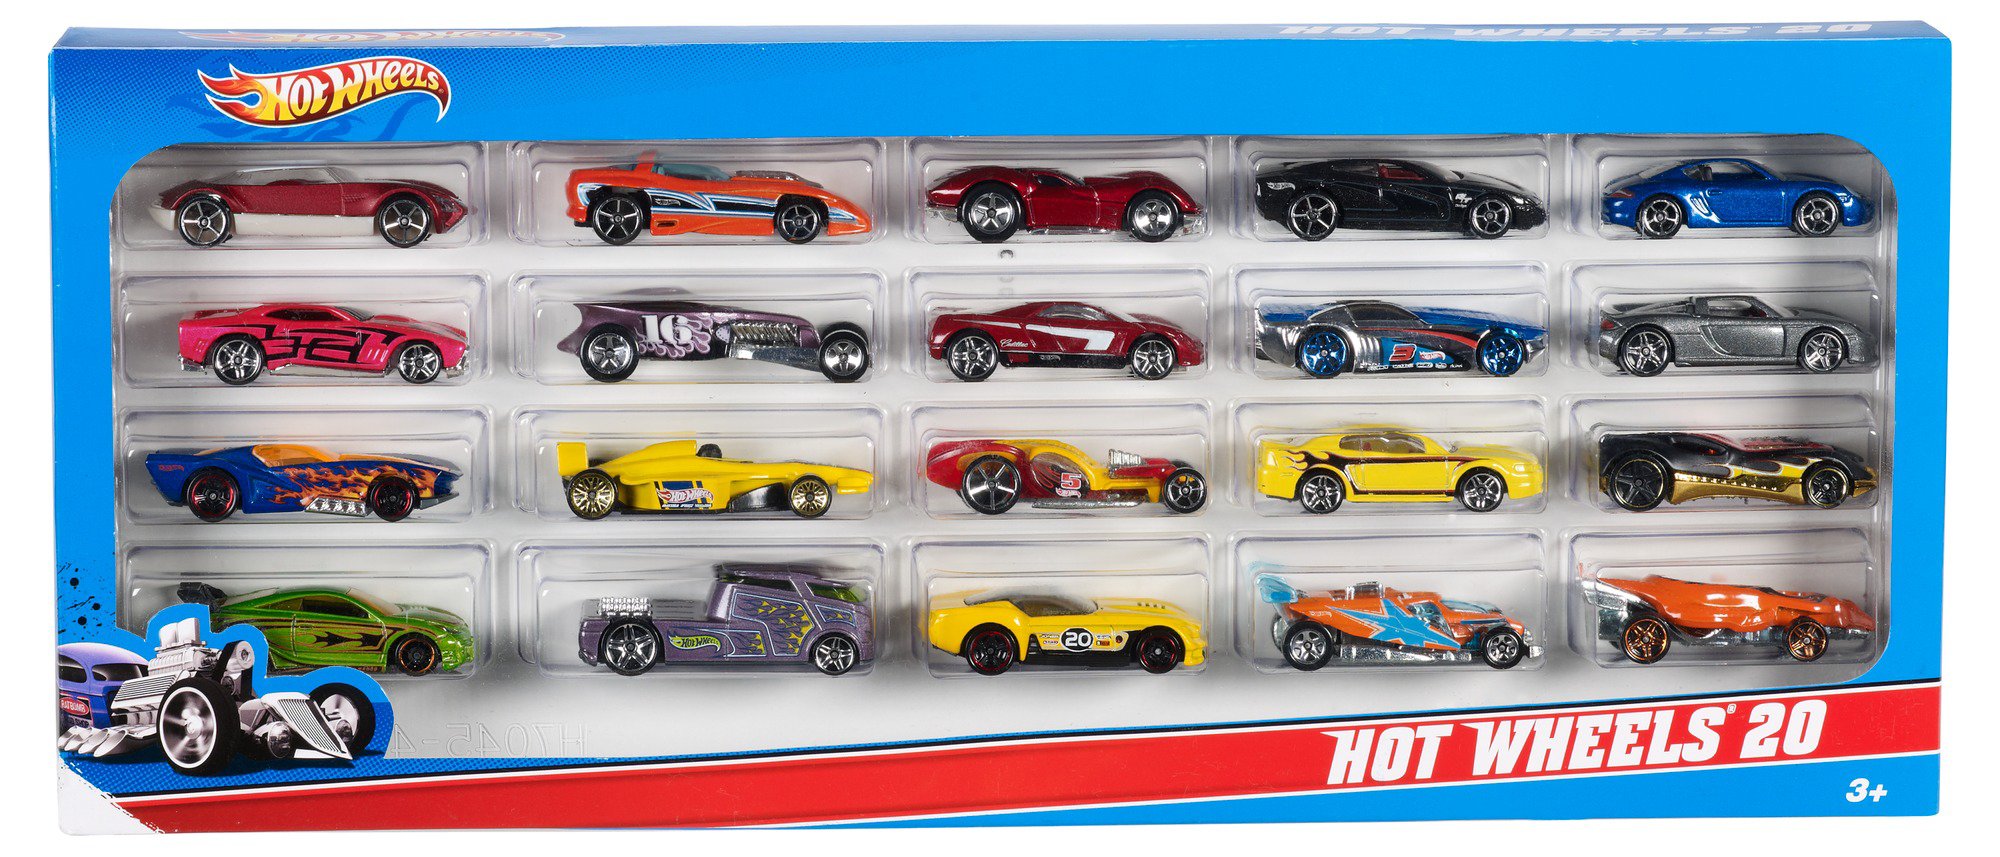 Peer olifant houder Hot Wheels Die Cast 1:64 Scale Vehicle Pack - Shop Toys at H-E-B